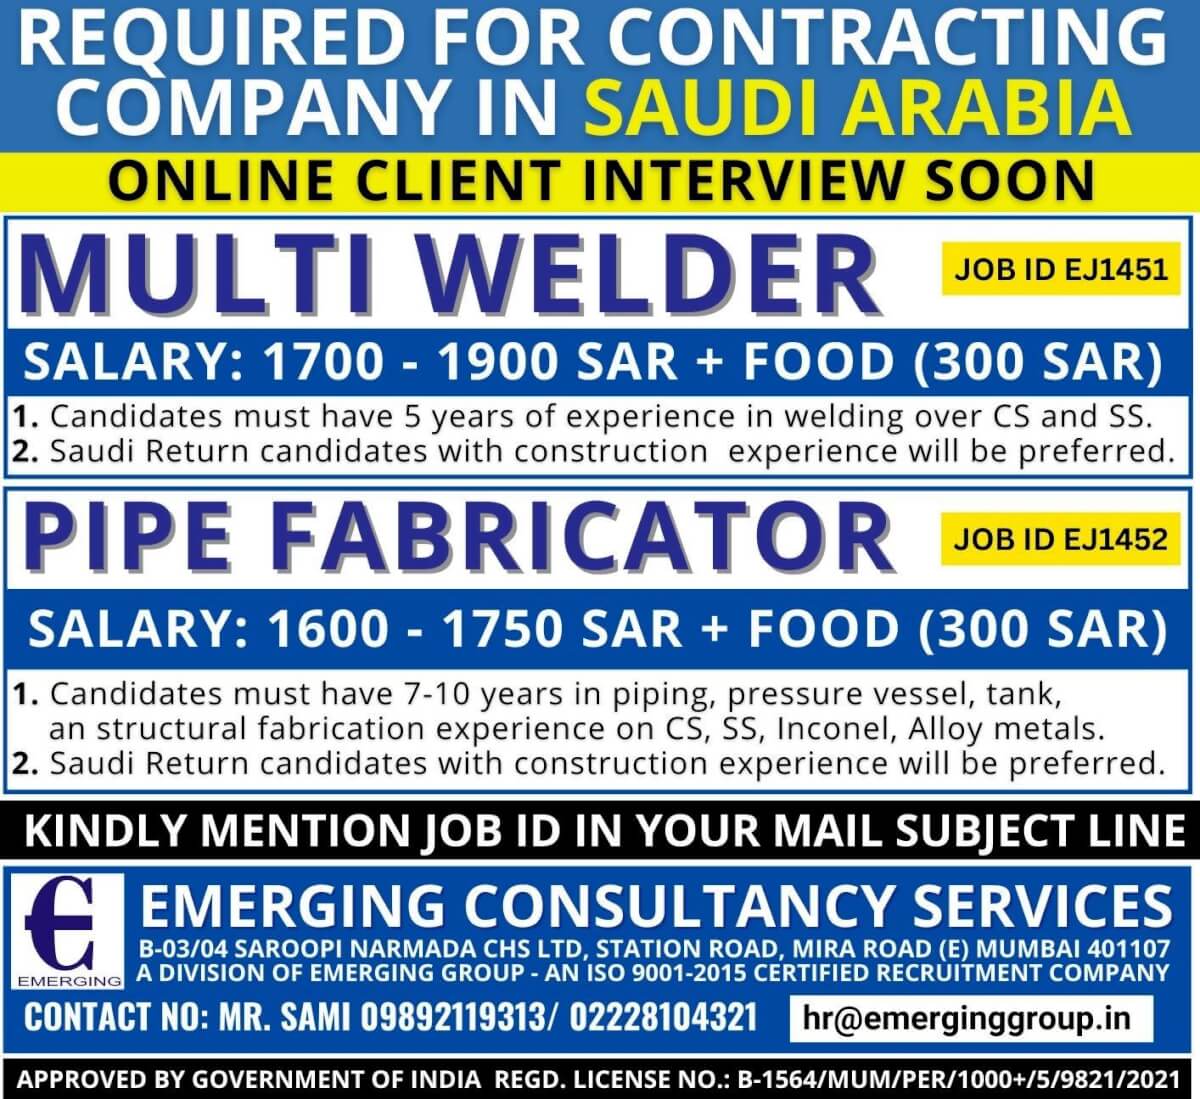 URGENTLY REQUIRED CONTRACTING COMPANY IN SAUDI ARABIA - CLIENT INTERVIEW SOON